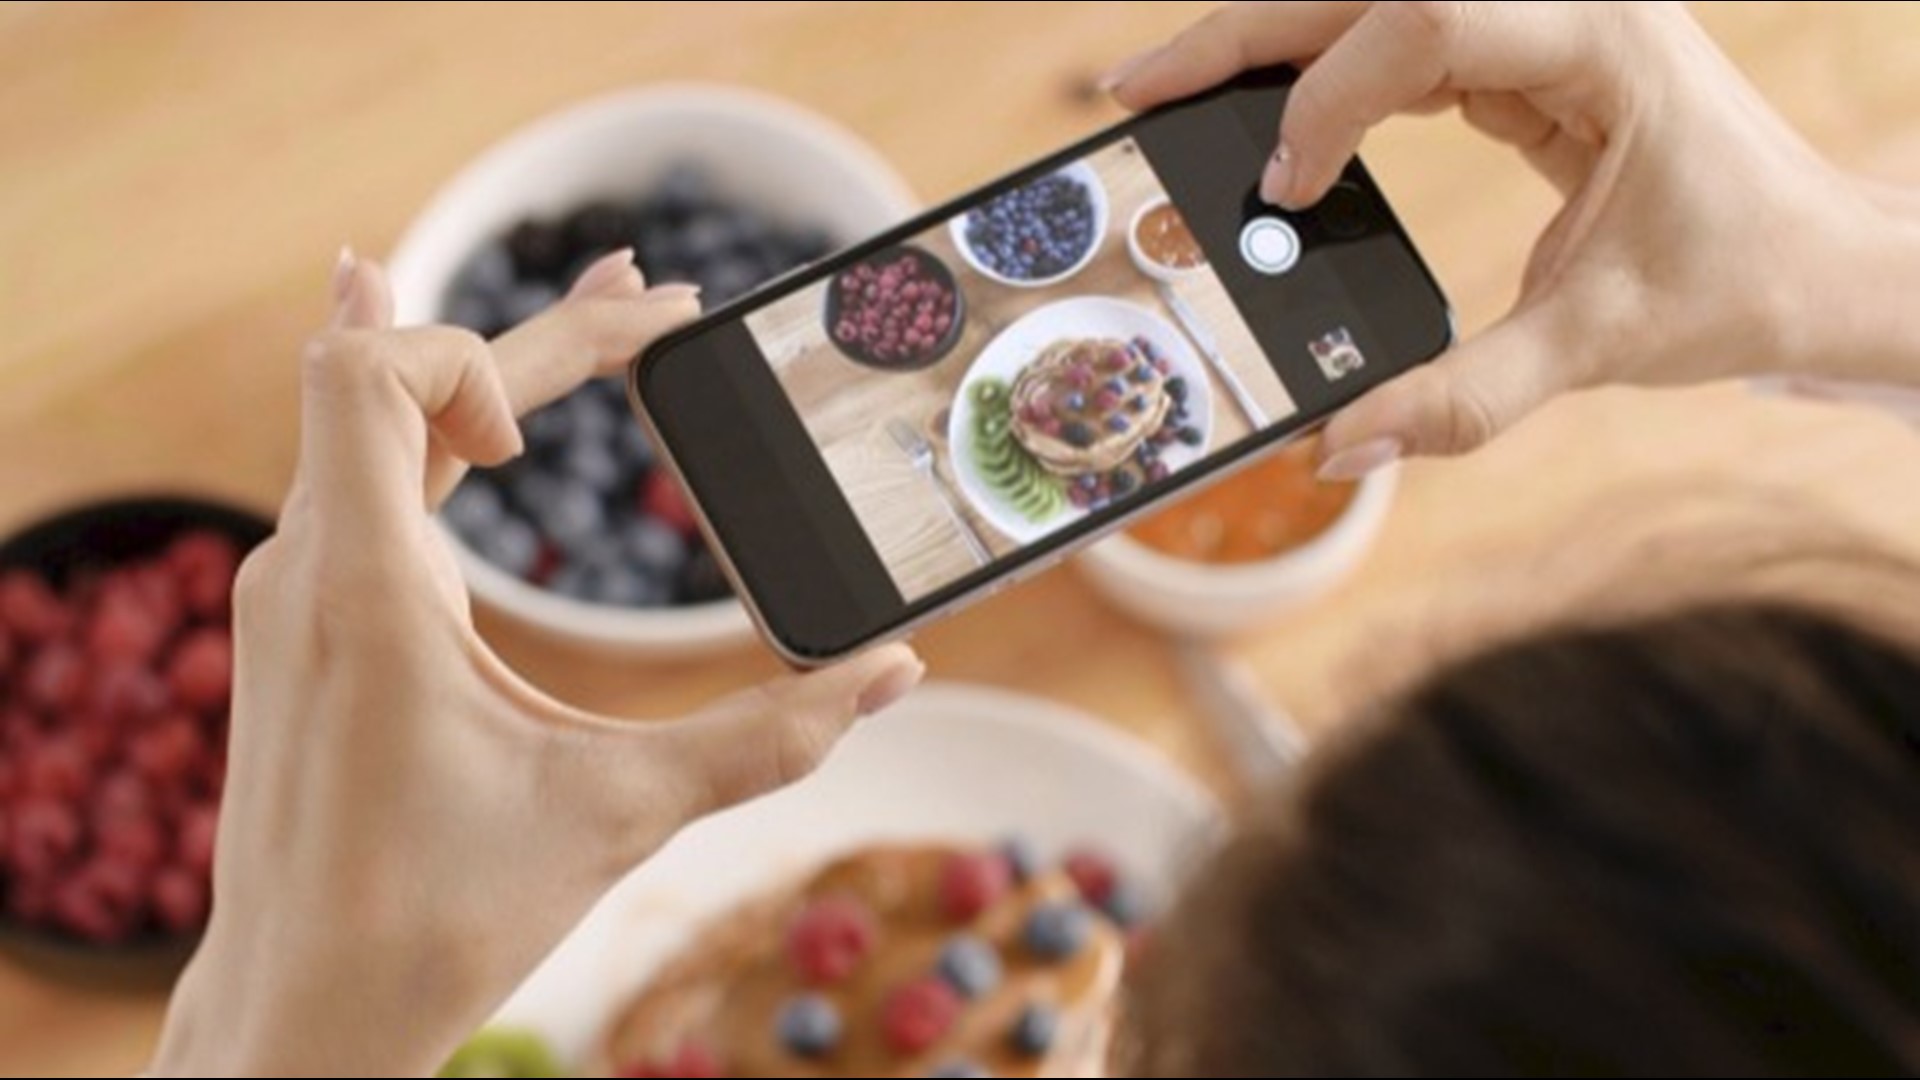 Experts worry about the harm that can come from the popular 'what I eat in a day' videos flooding TikTok, Instagram and other popular social media outlets. Veuer's Maria Mercedes Galuppo has the story.